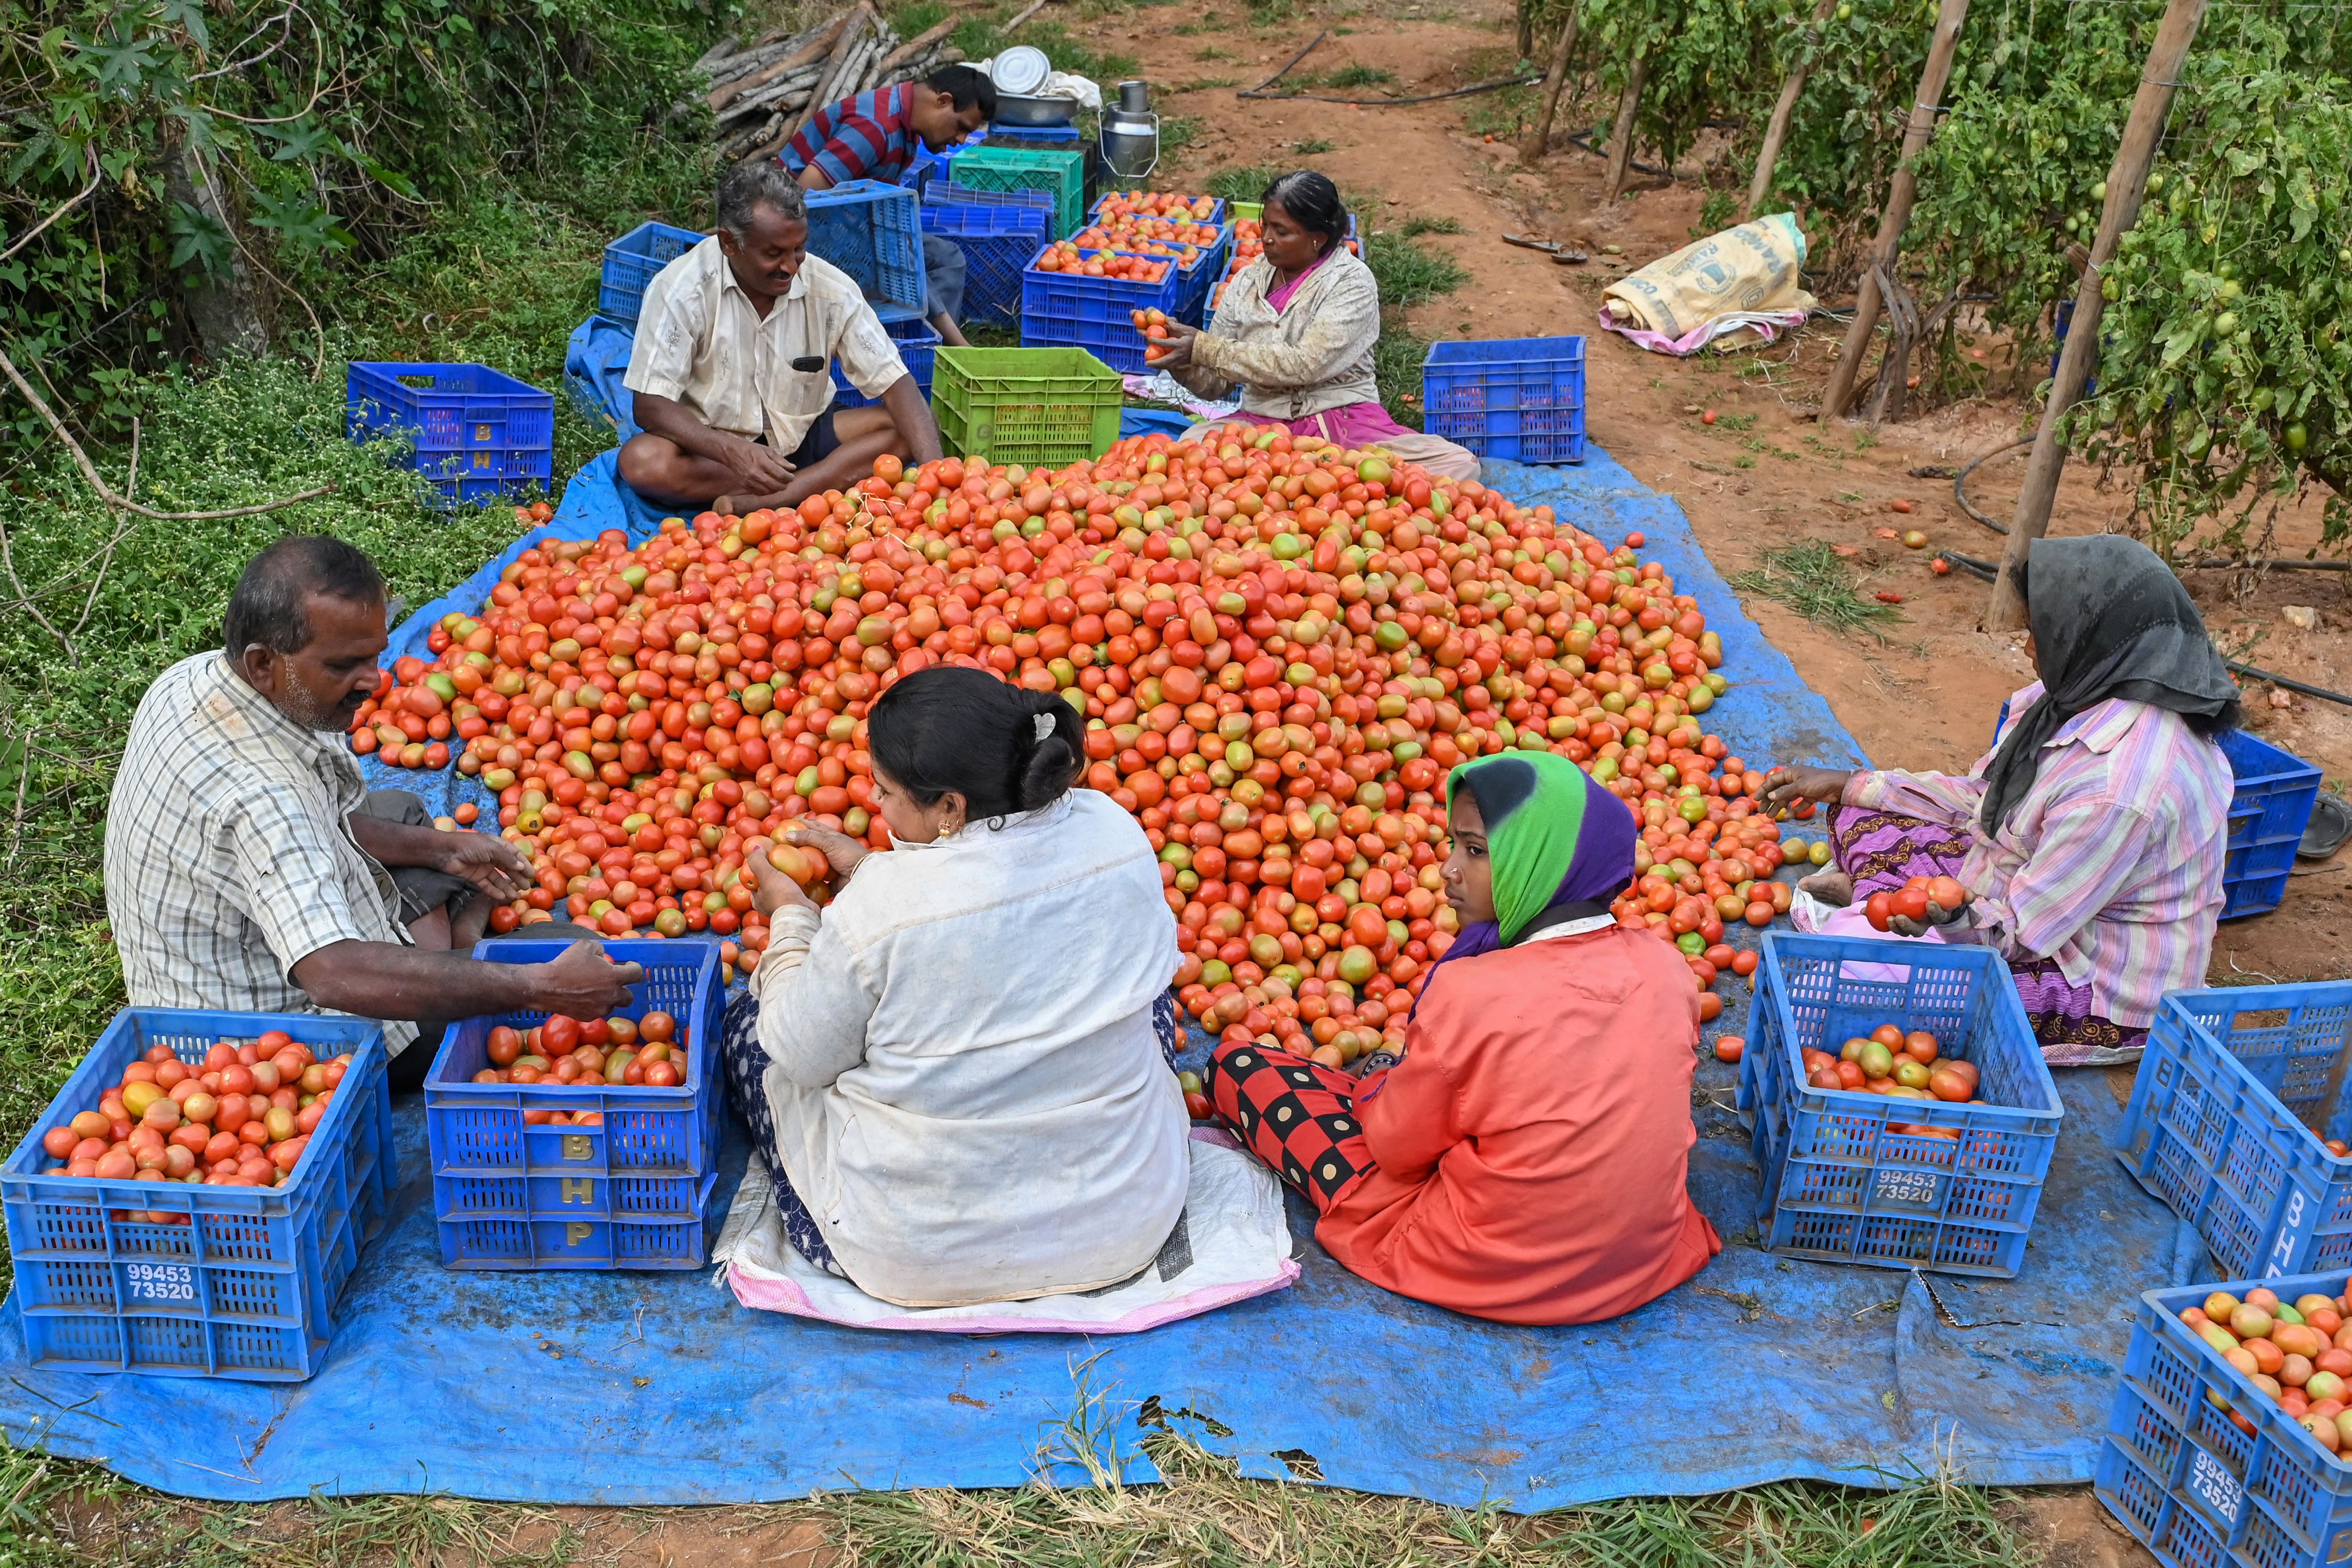 Farmers and farm labourers sort a harvest of tomatoes before loading them in crates, on the outskirts of Bengaluru on 8 December 2022